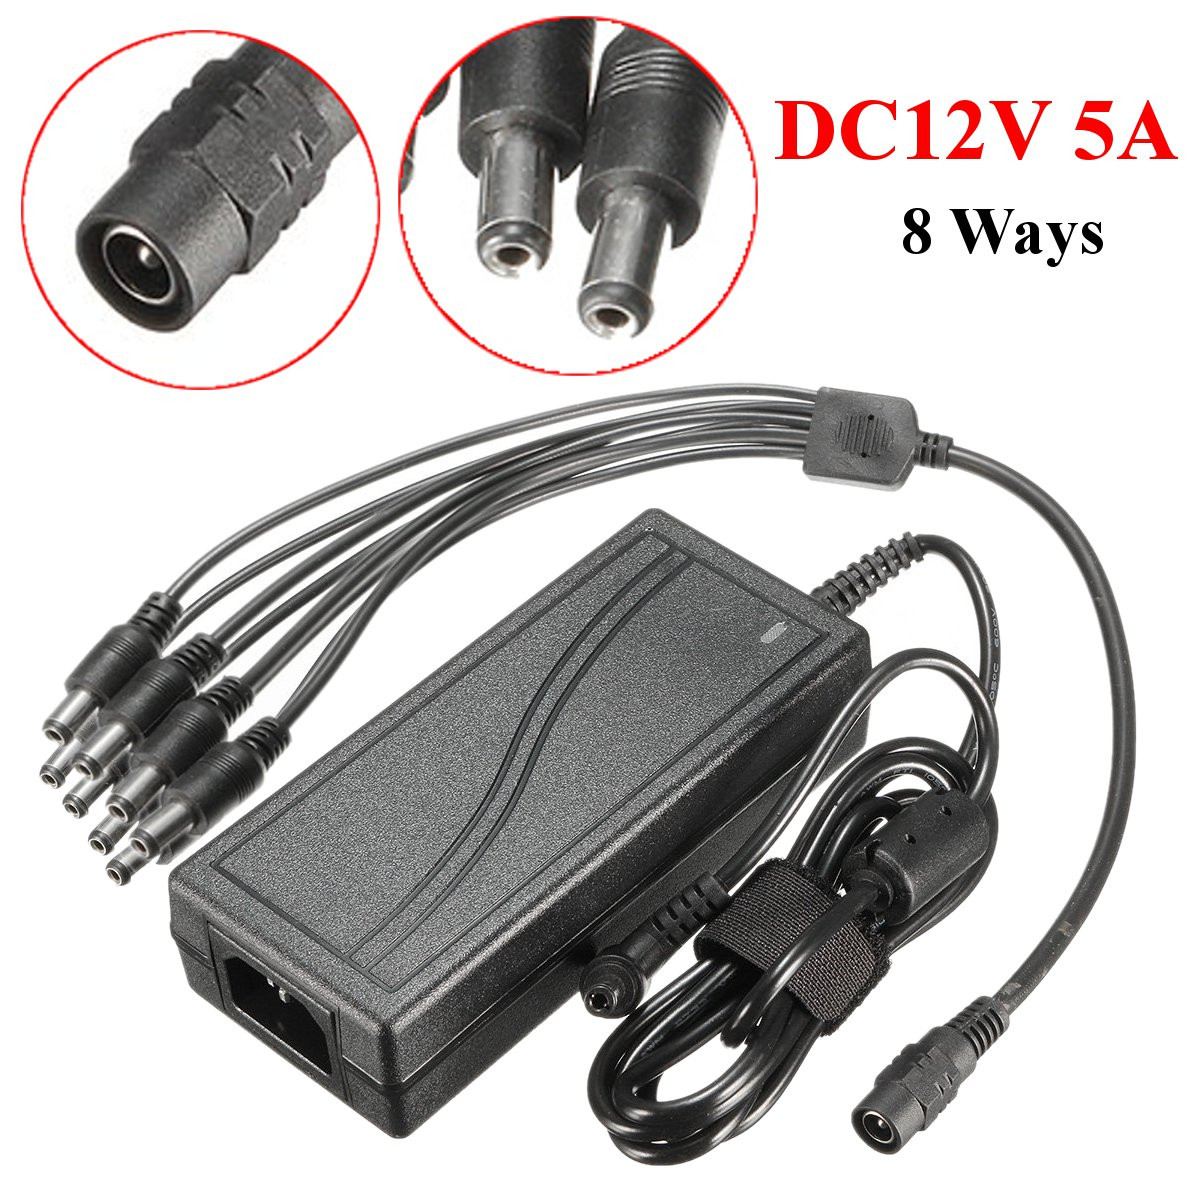 DC12V 5A Monitor Power Adapter Voor Camera Radio Led Pc + 8 Way Power Splitter Kabel